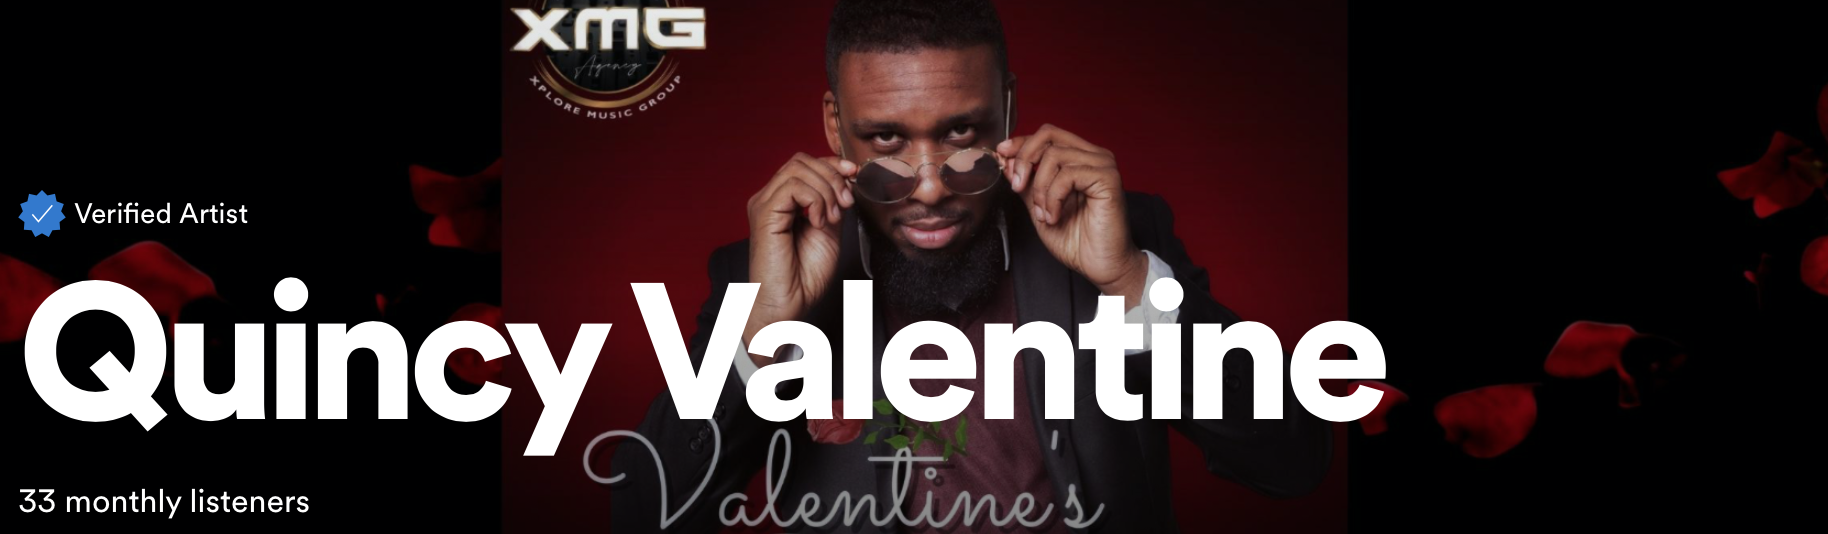 Quincy Valentine has worked with many different artists and warmed the hearts and minds of many through his art; he has released his first EP ‘Valentine’s Day’